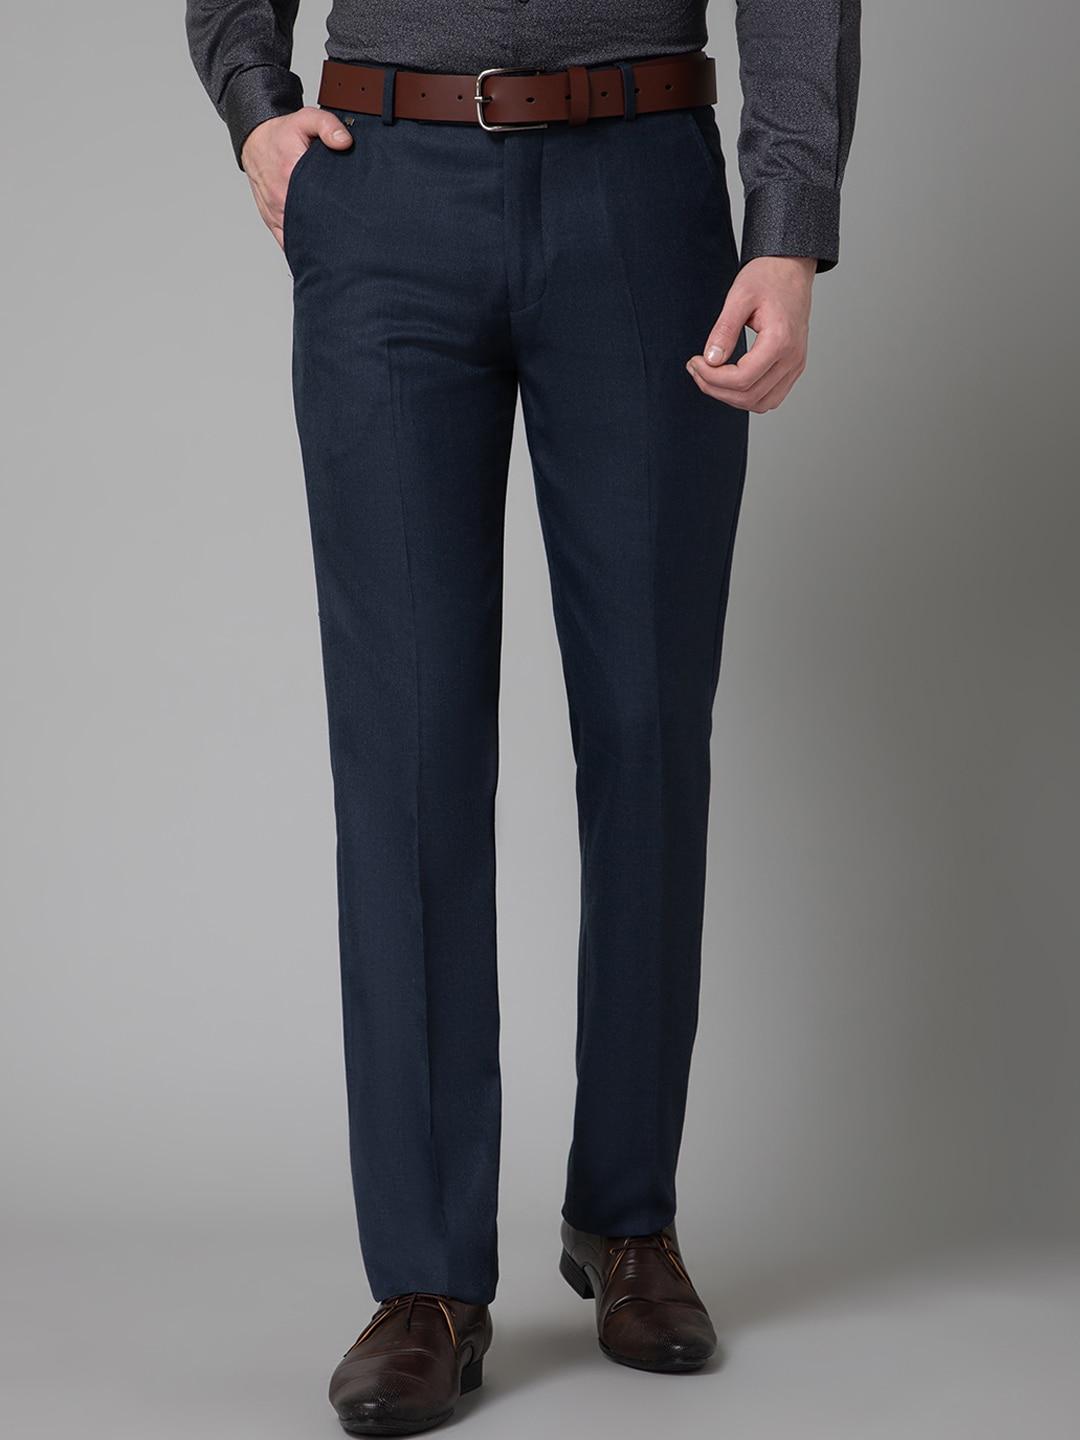 cantabil-mid-rise-flat-front-regular-fit-formal-trousers